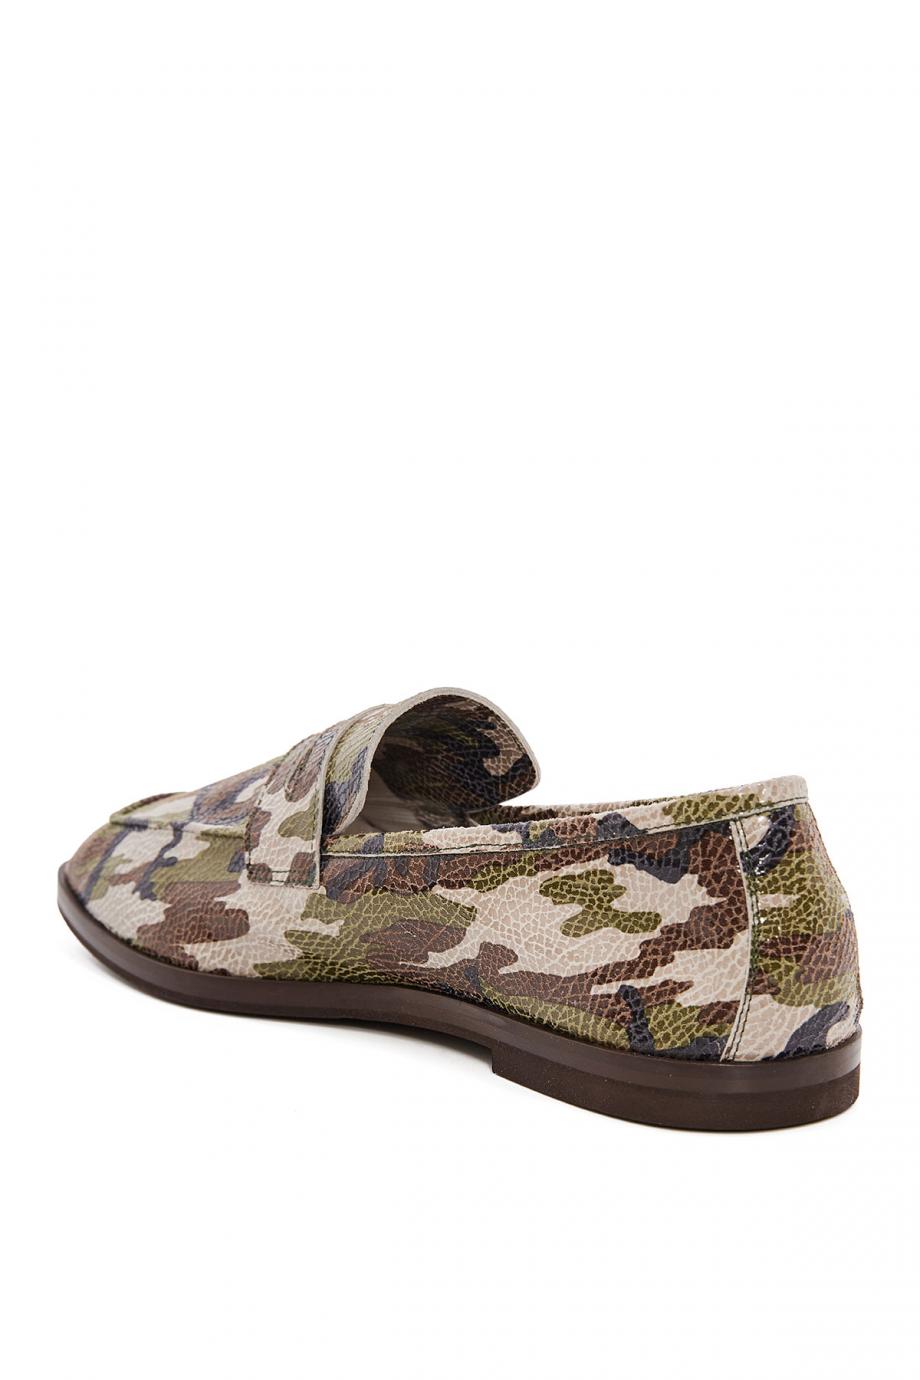 Chalet Uomo printed leather loafers